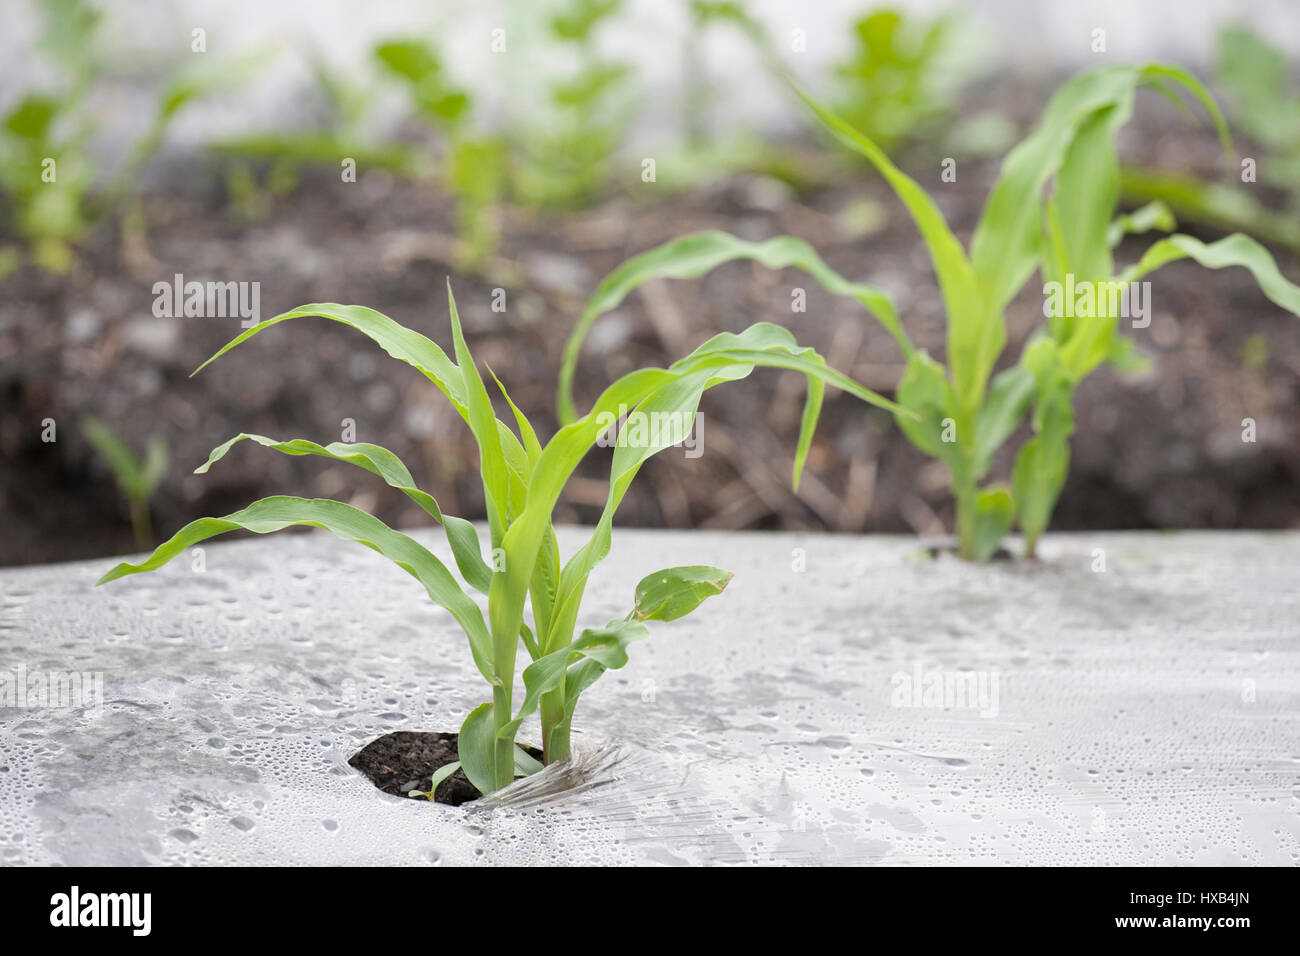 Corn plant, with soil covered by plastic for weed  and moisture control Stock Photo